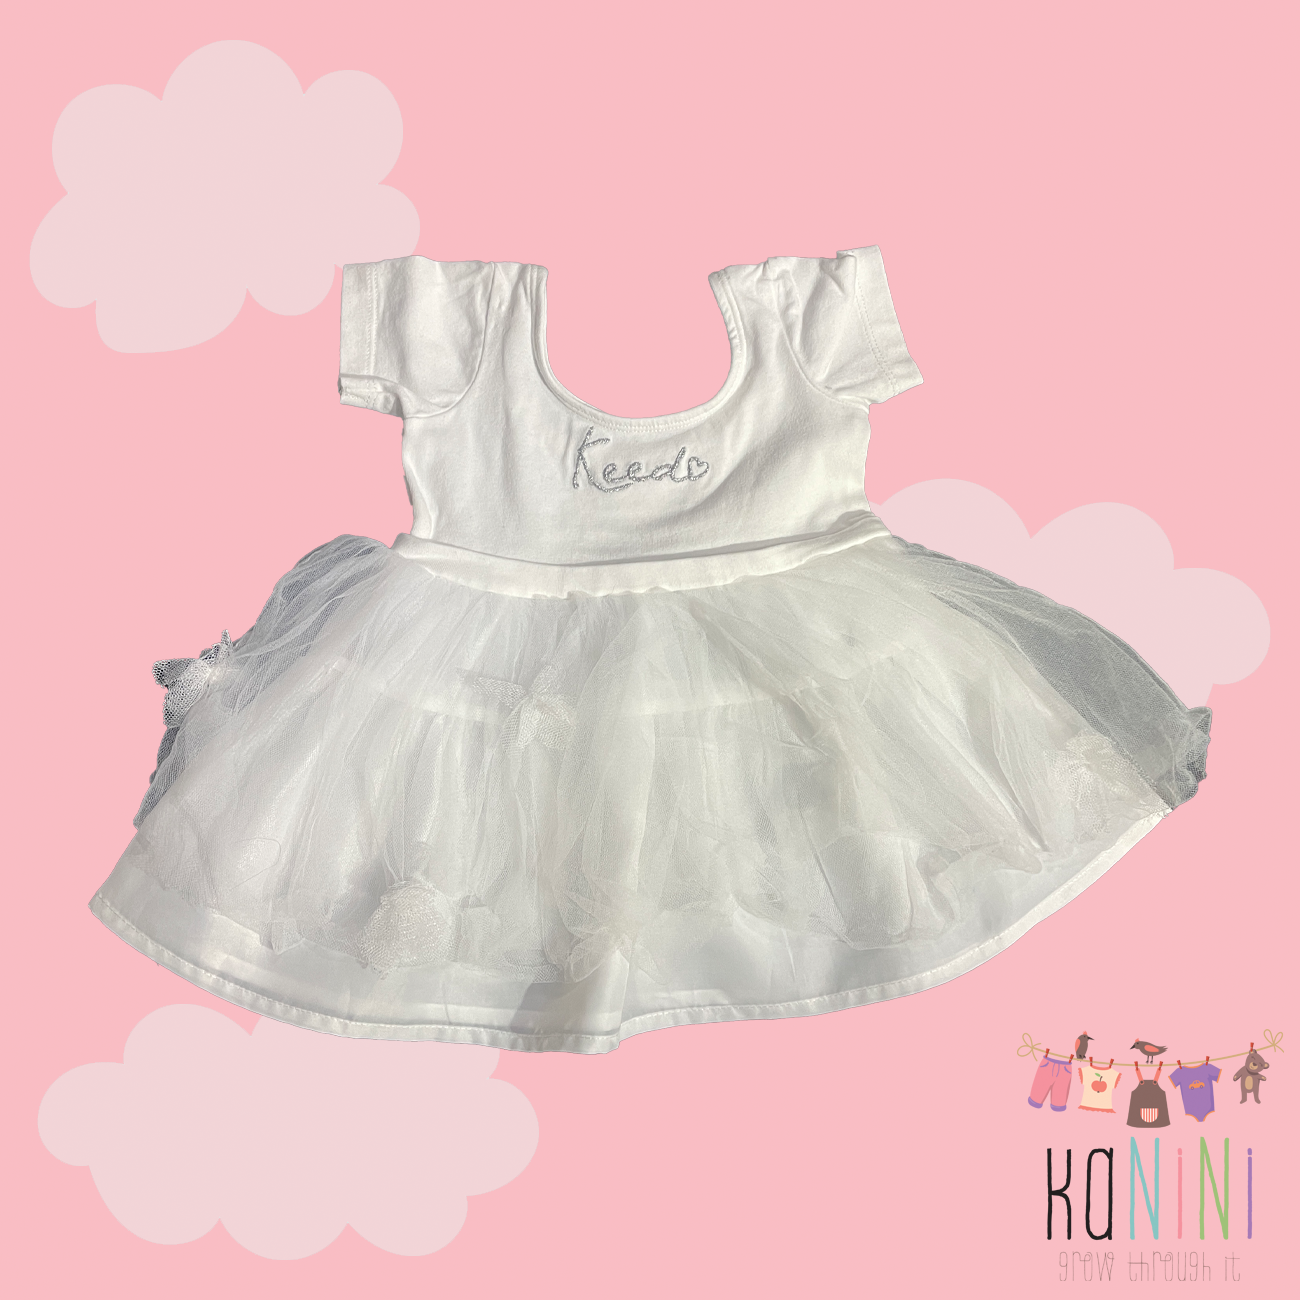 Featured image for “Keedo 3 - 6 Months Girls White Twirl Dress”